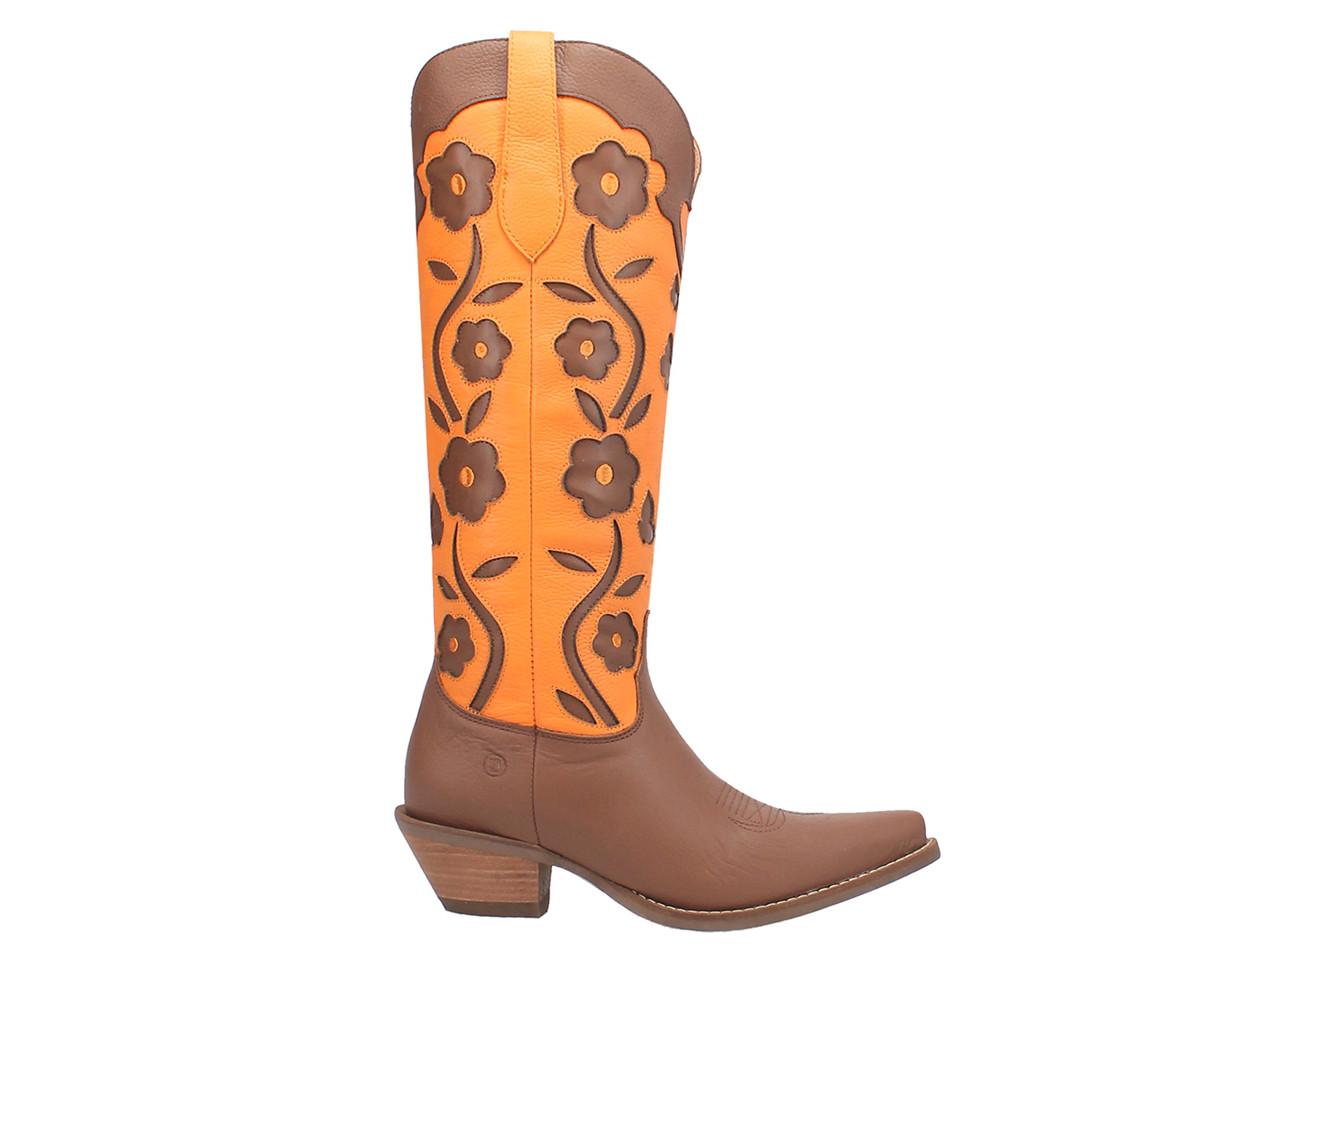 Women's Dingo Boot Goodness Gracious Western Boots